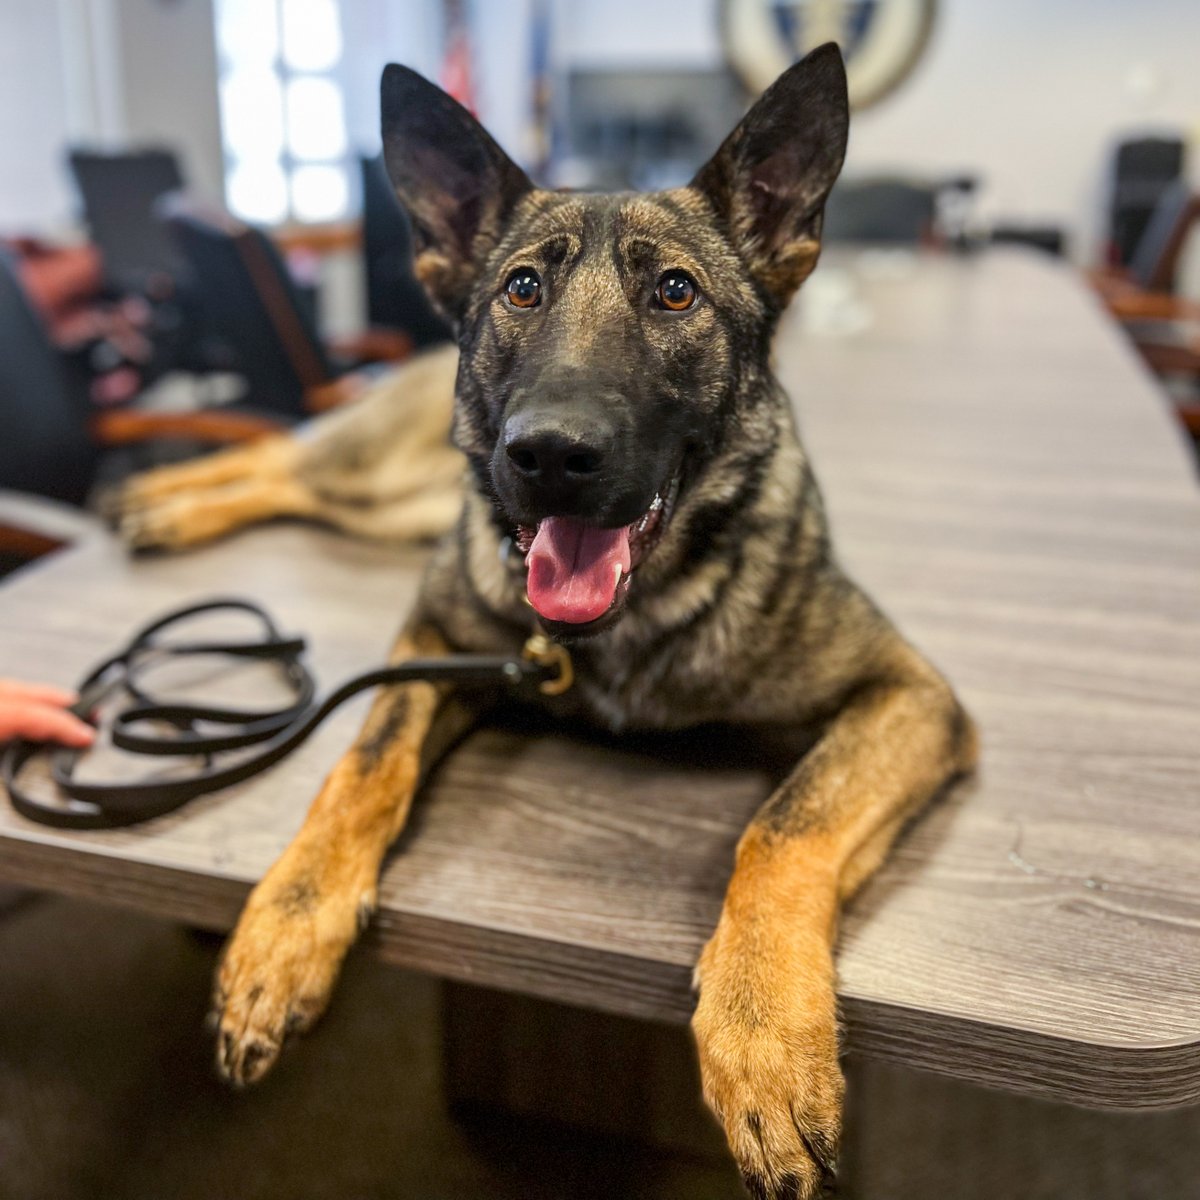 When your K9 co-worker insists on a top view of the operations. Way to keep a watch, Max.

#Corrections #CareerInCorrections #WorkingDog #K9 #K9Trainer